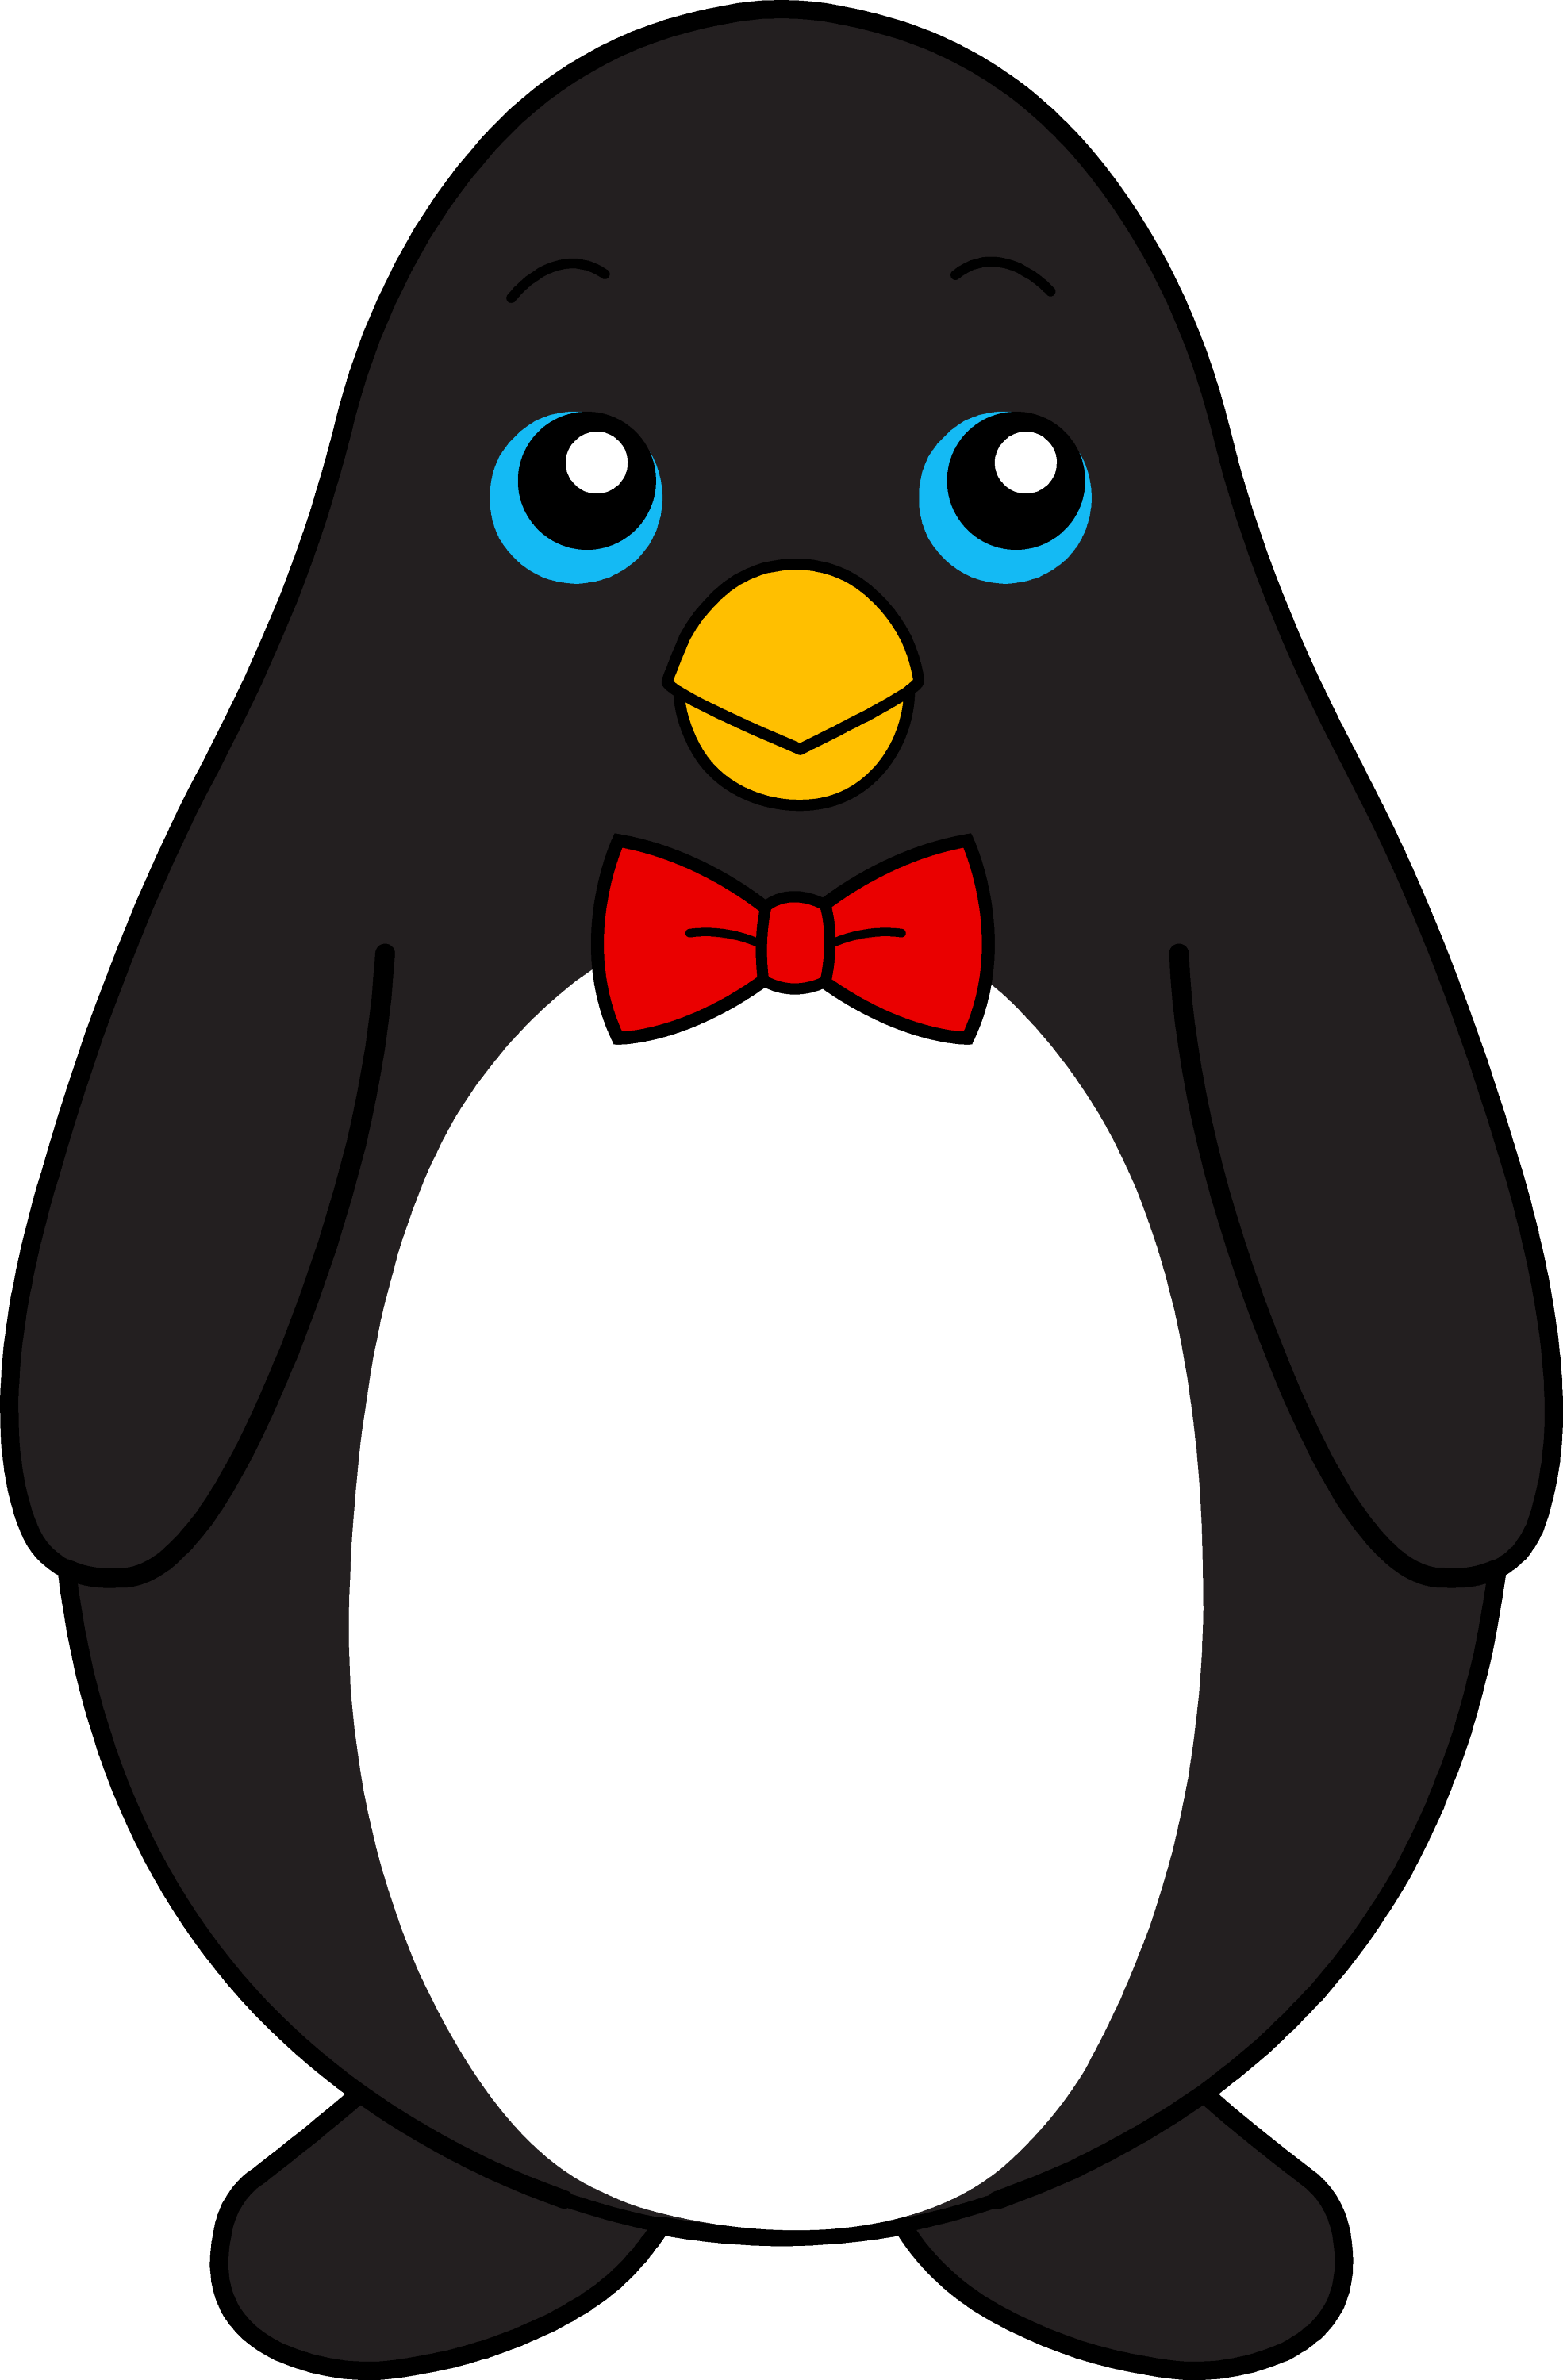 Cute Black Penguin With Red Bow Tie Free Clip Art